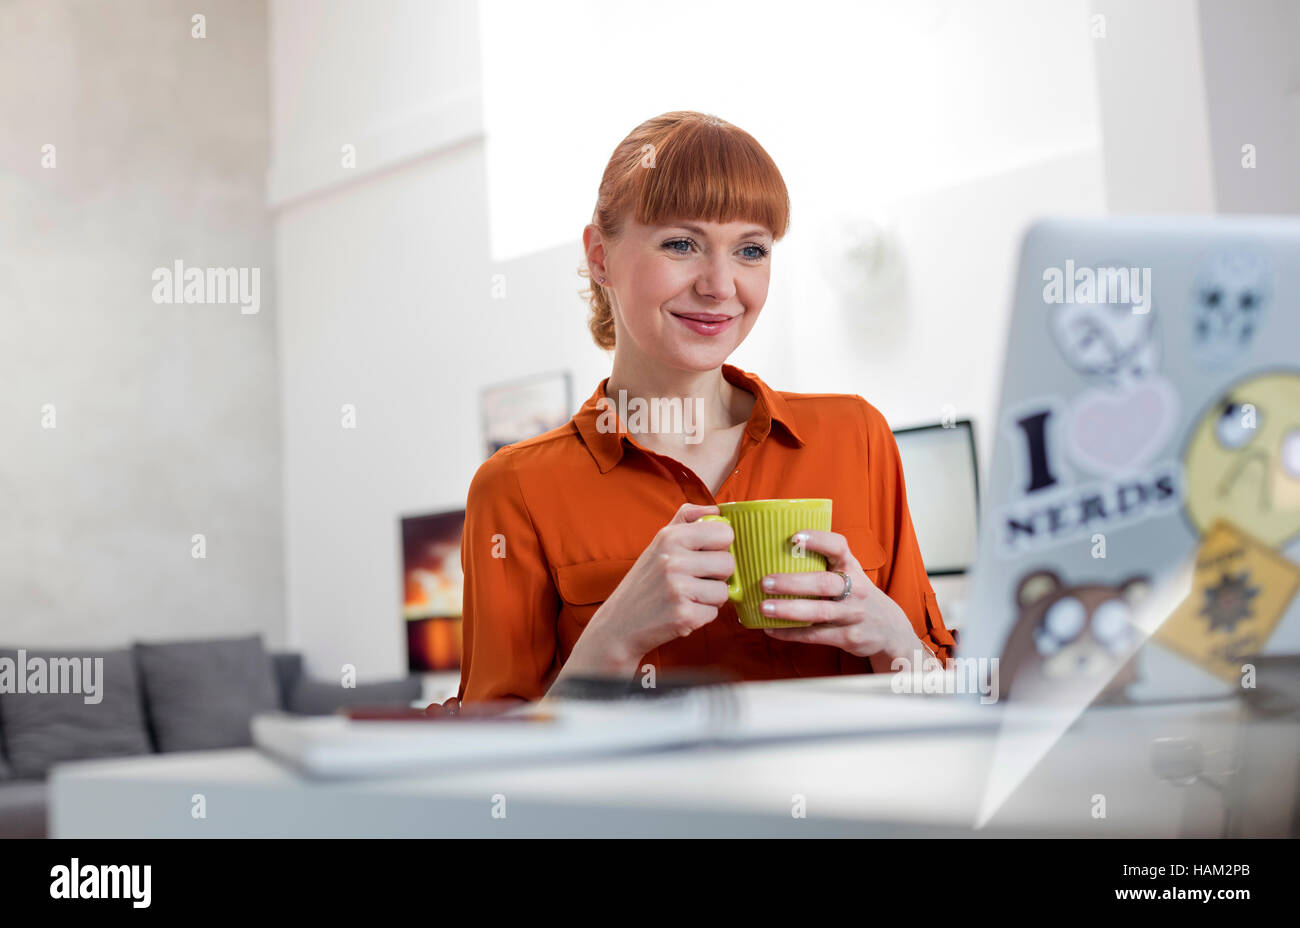 Smiling woman drinking coffee and working at laptop Stock Photo